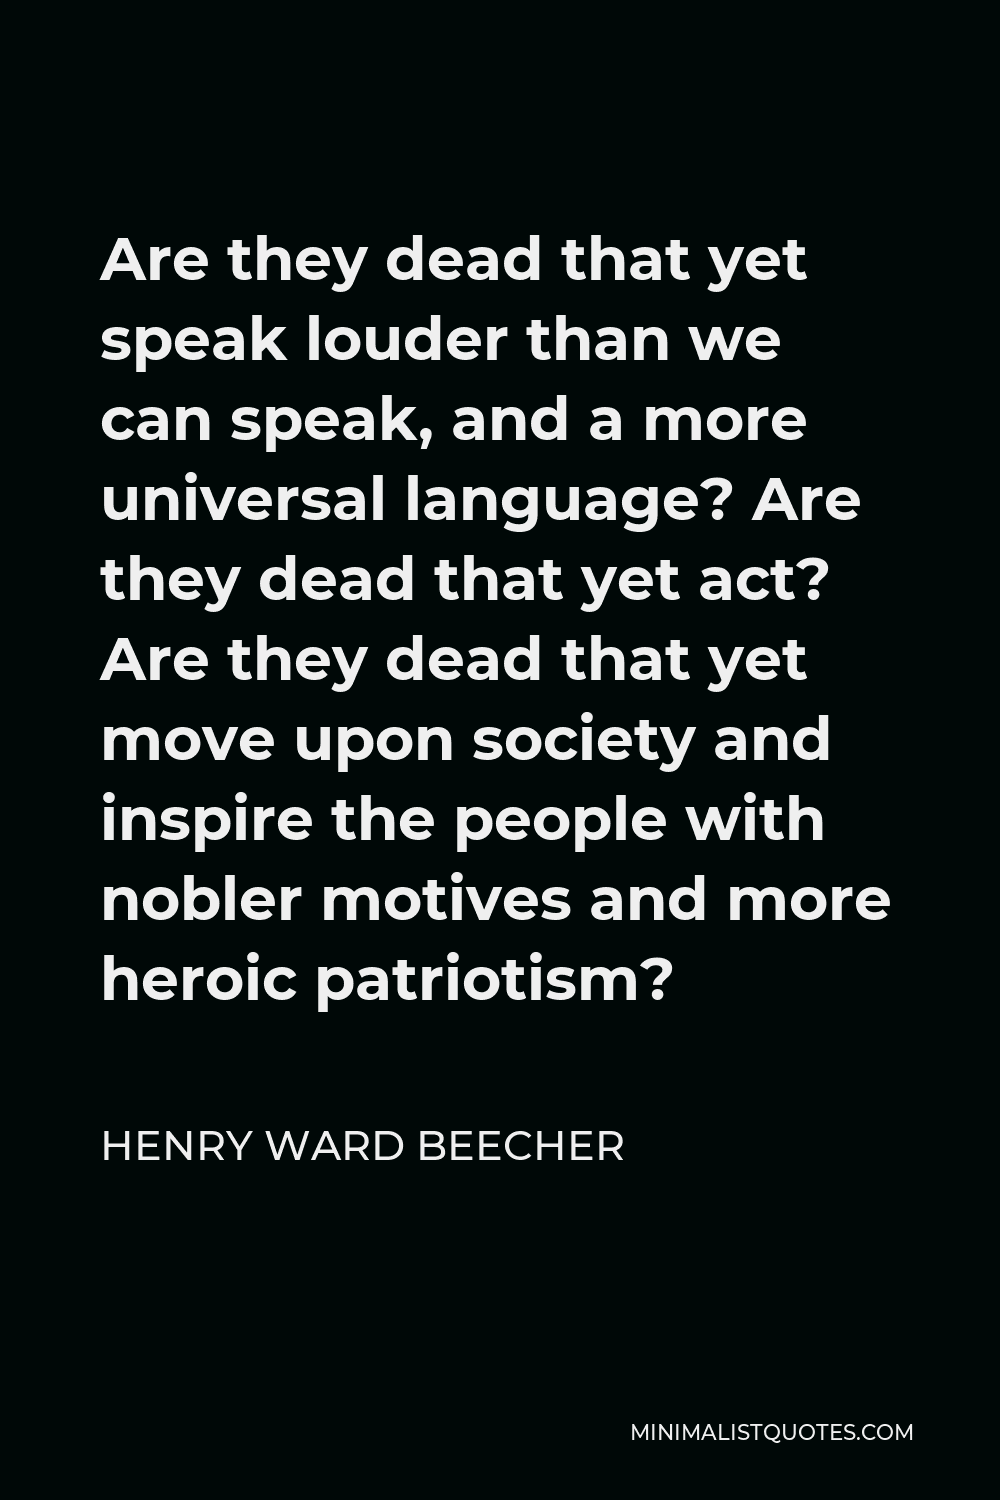 Henry Ward Beecher Quote - Are they dead that yet speak louder than we can speak, and a more universal language? Are they dead that yet act? Are they dead that yet move upon society and inspire the people with nobler motives and more heroic patriotism?